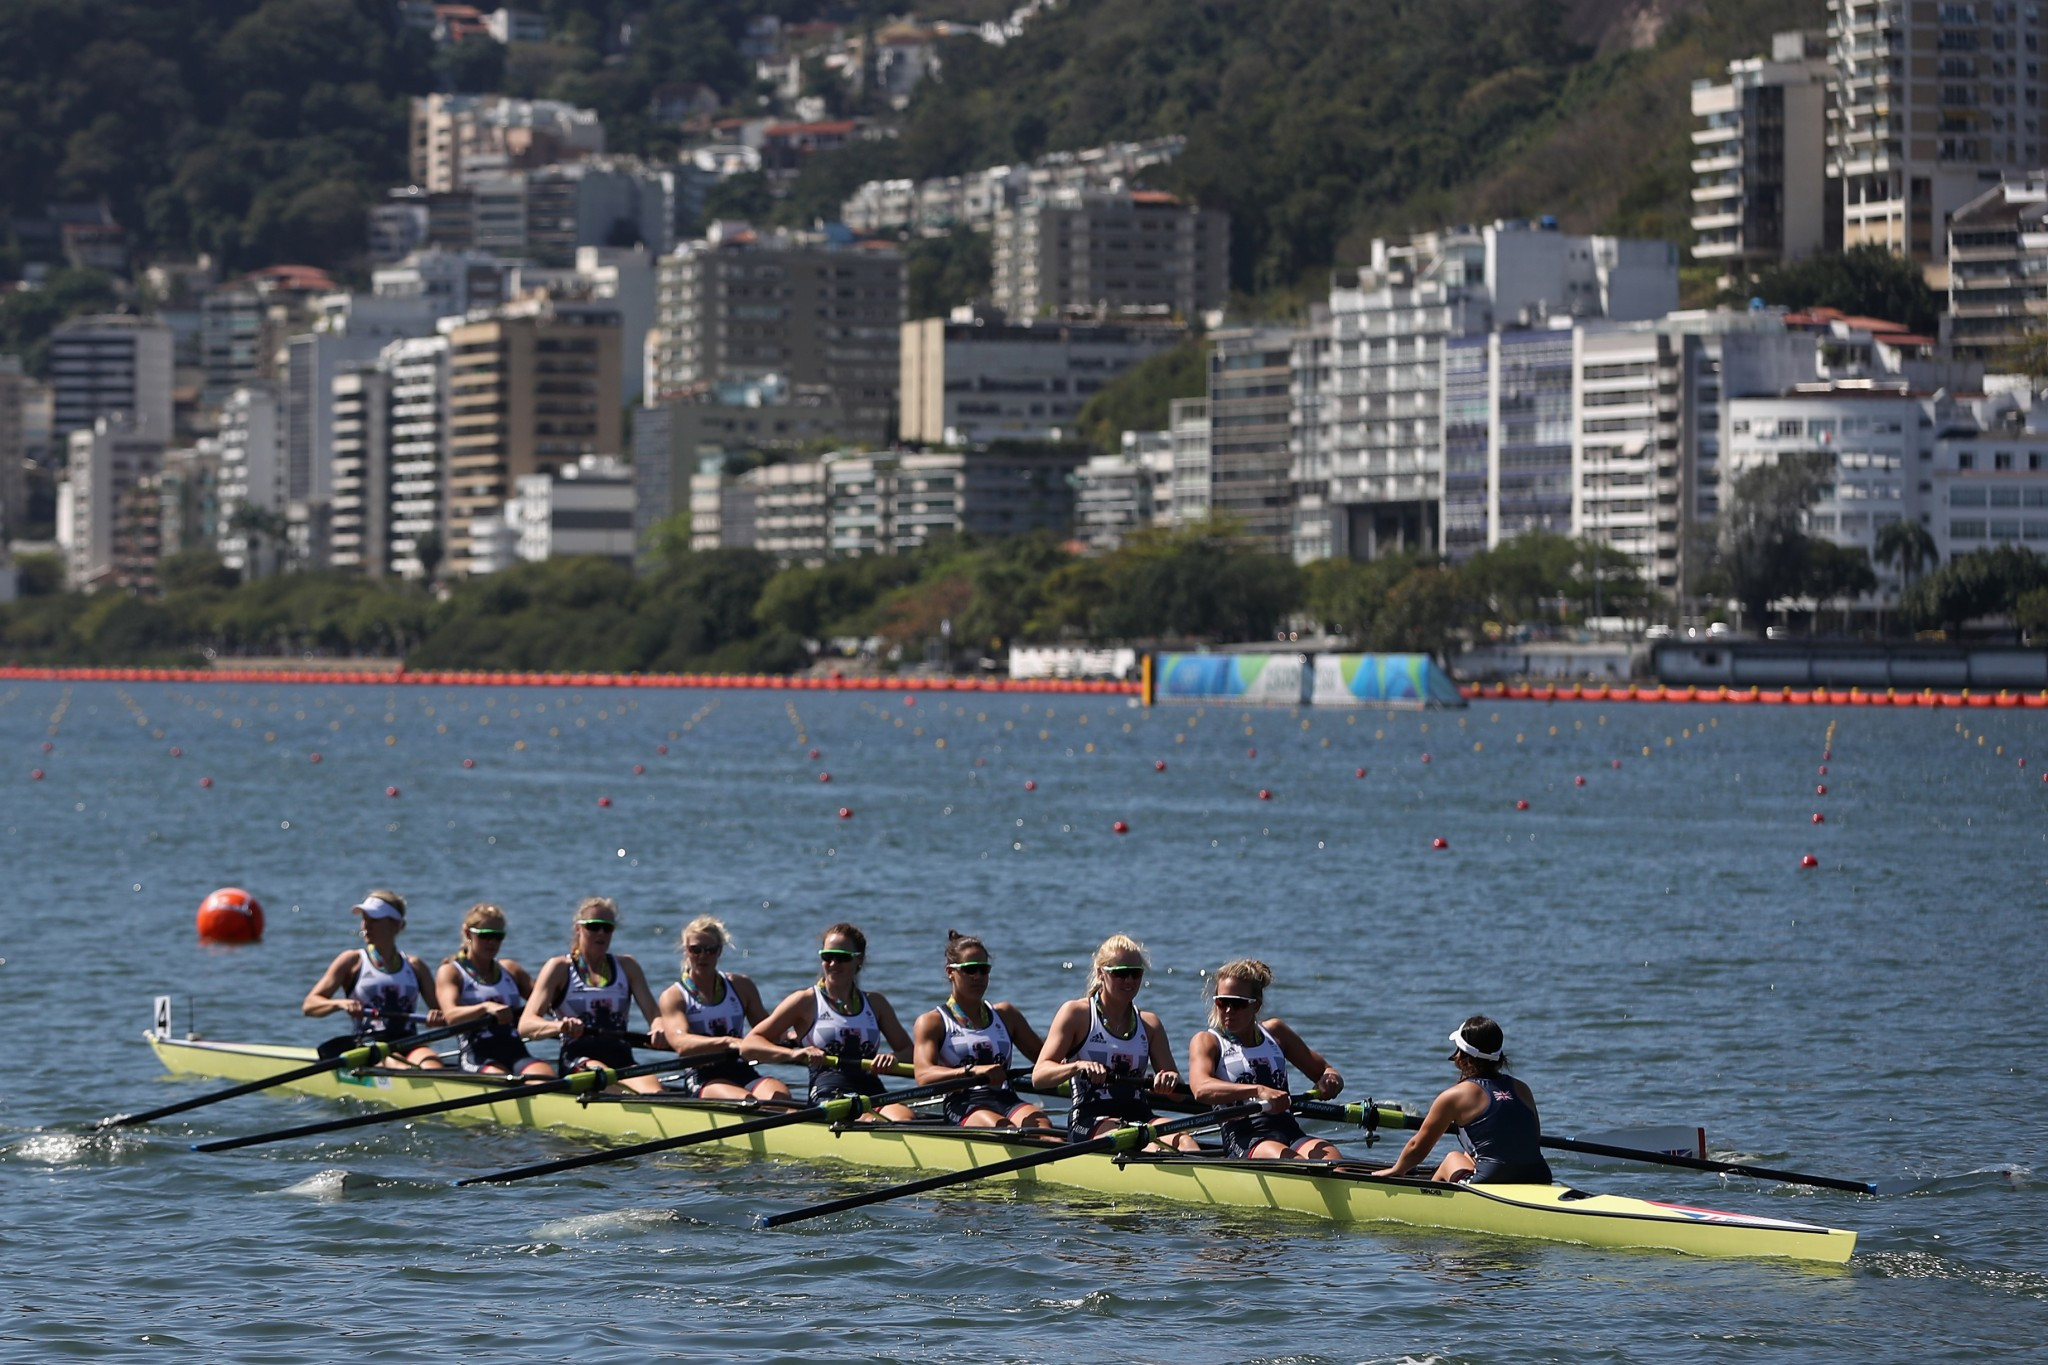 Exclusive: World Rowing got fewer Olympic TV dollars from Rio 2016 than London 2012 